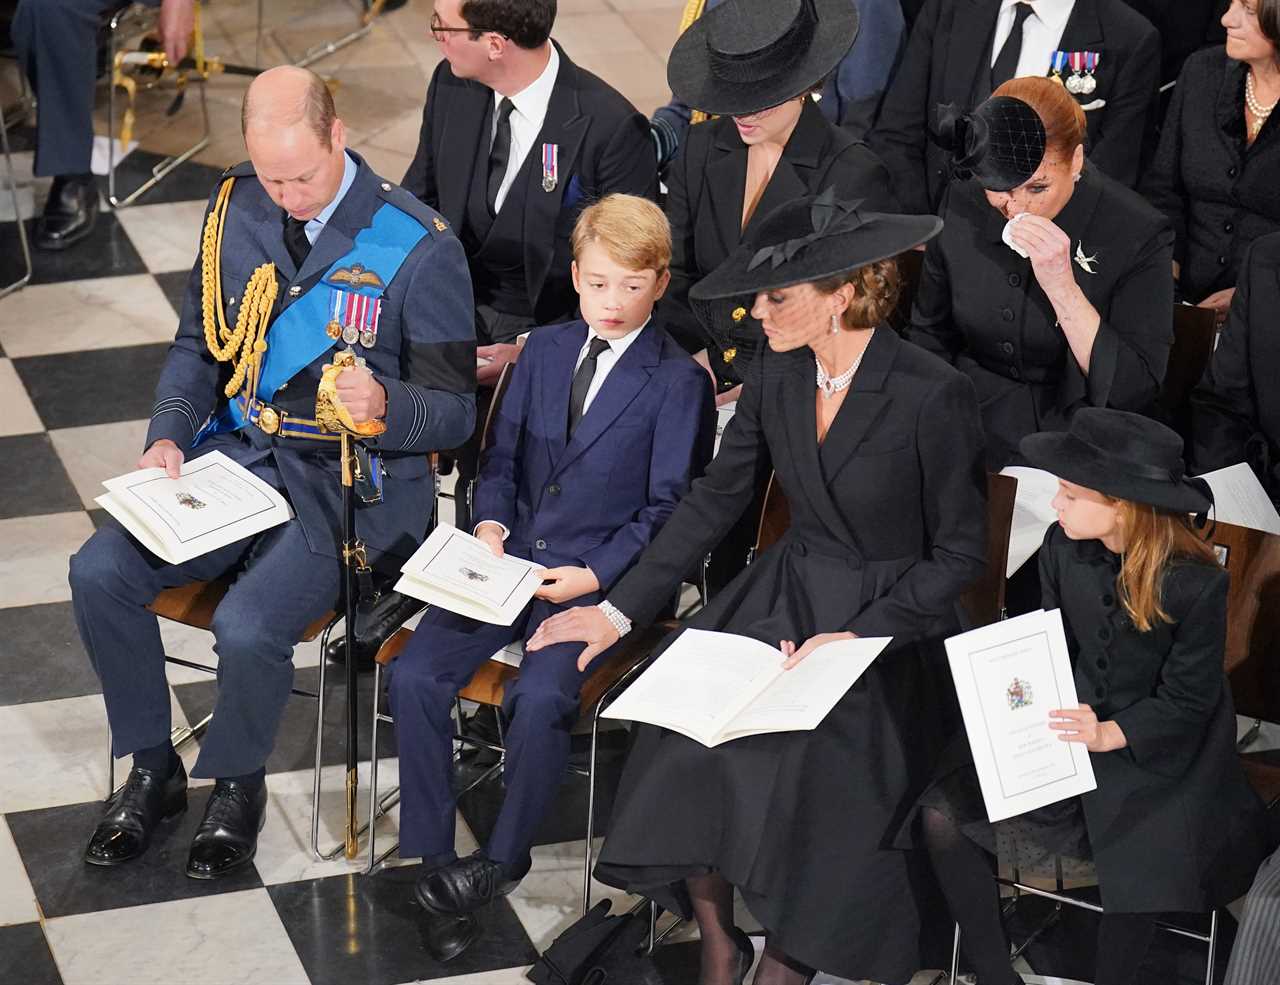 Sweet moment between Kate & Princess Charlotte at Queen’s funeral spoke volumes about her as mum, says parenting expert